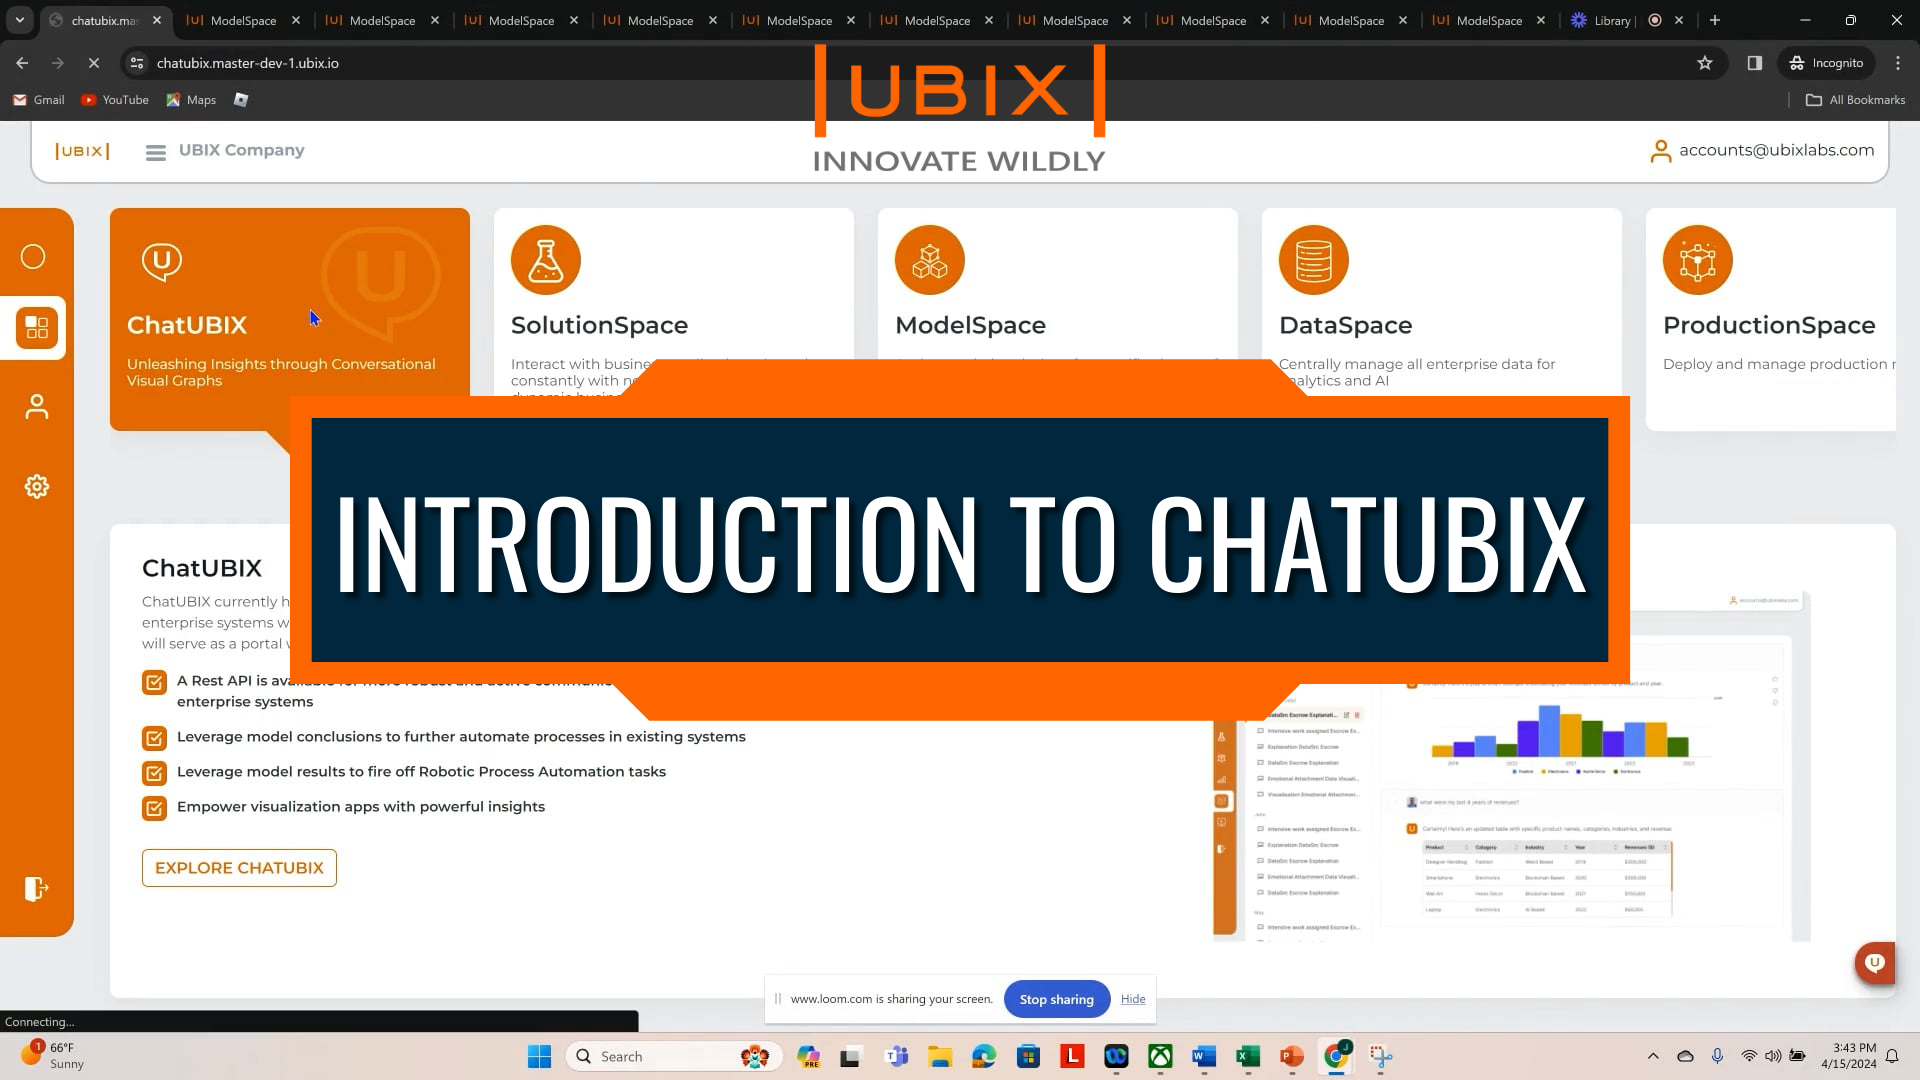 Introduction to ChatUBIX